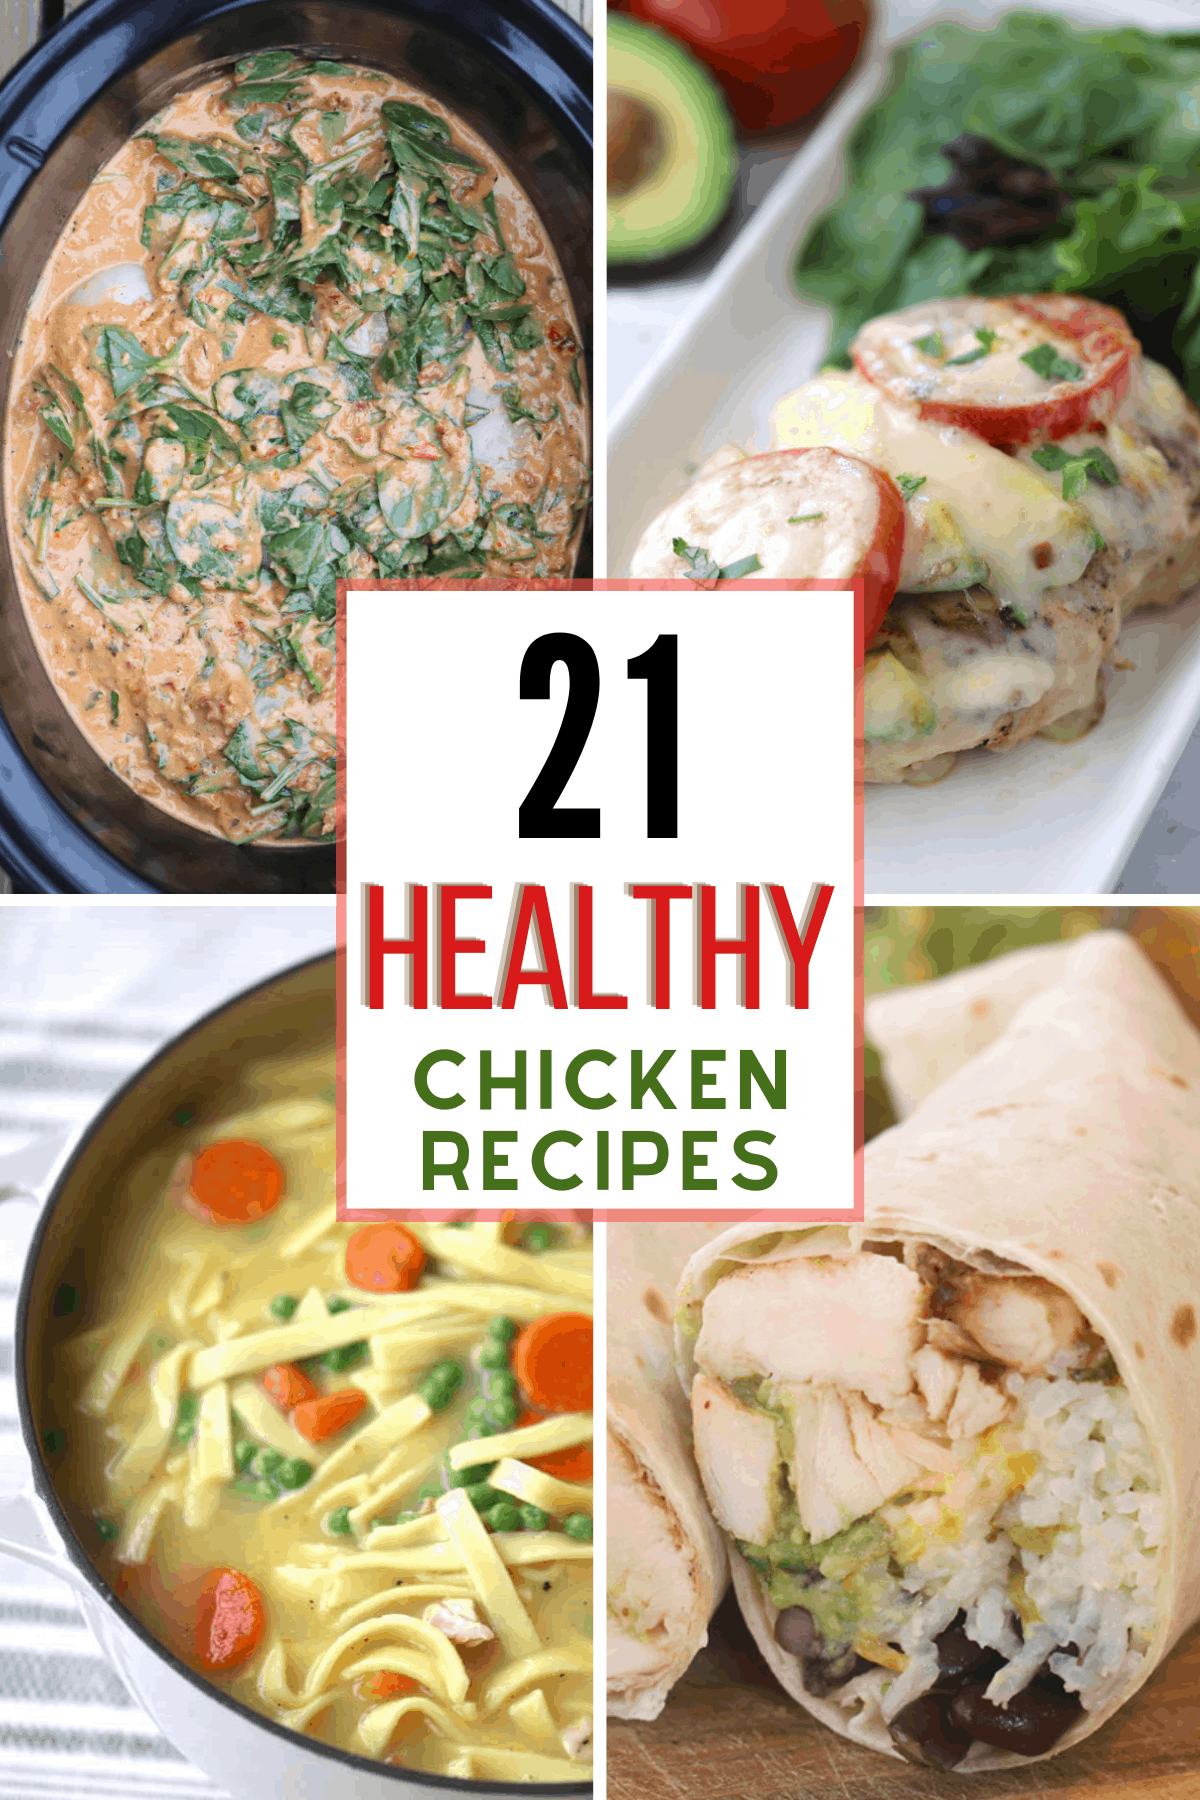 21 healthy chicken recipes with 4 images of chicken recipes